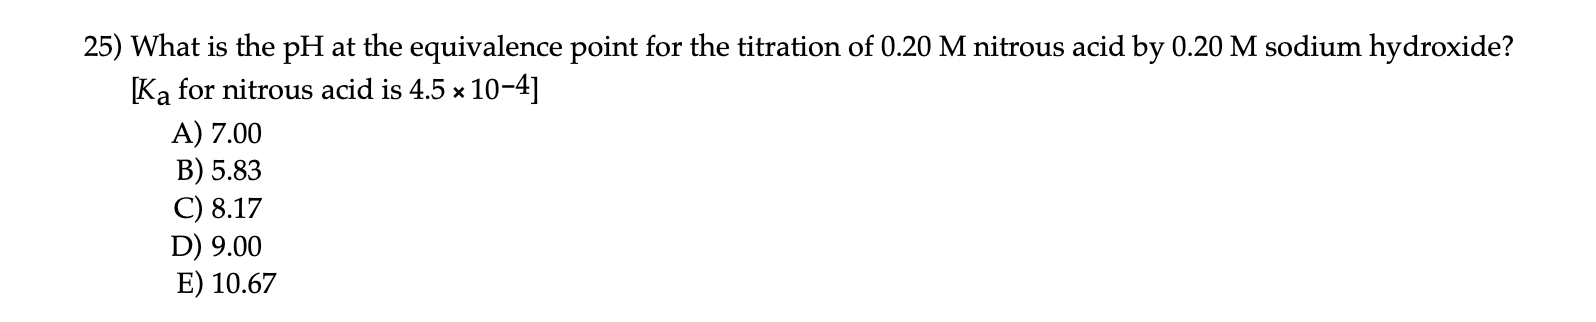 25) What is the pH at the equivalence point for the titration of 0.20 M nitrous acid by 0.20 M sodium hydroxide?
[Ka for nitrous acid is 4.5 x 10-4]
